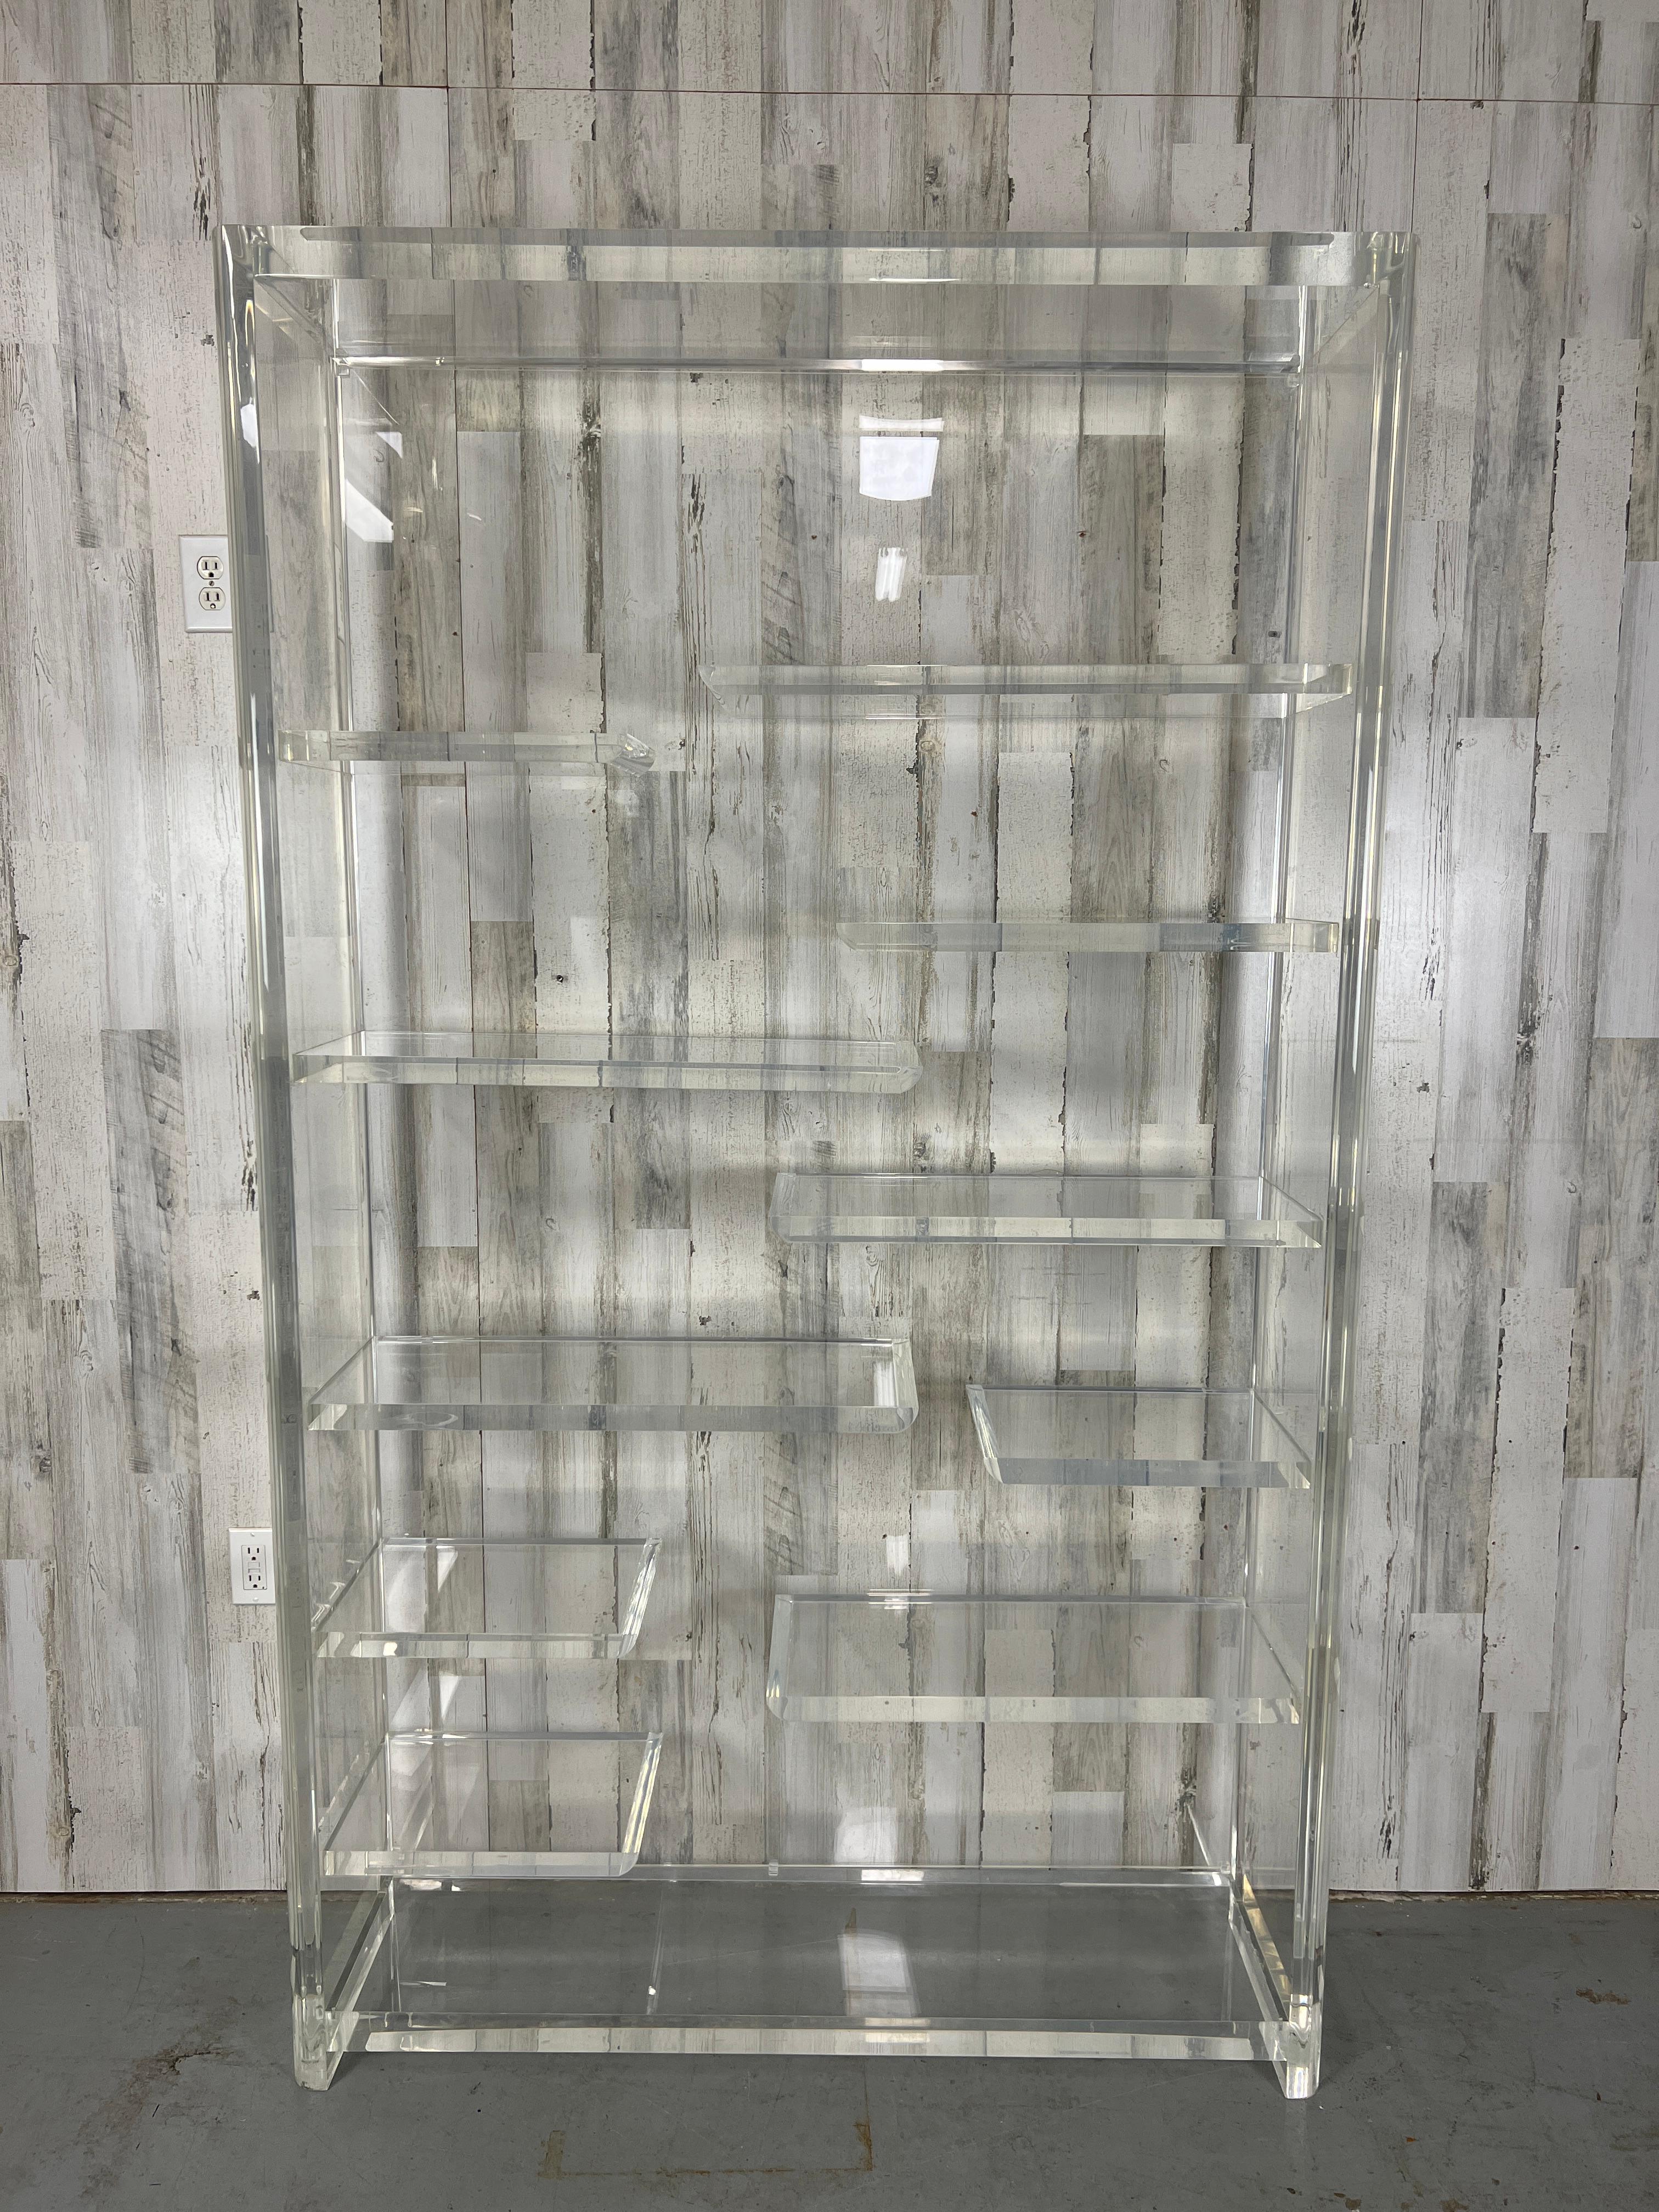 Lucite Multi Level Etagere. Thick transparent lucite shelf unit perfect for many books or small decor.